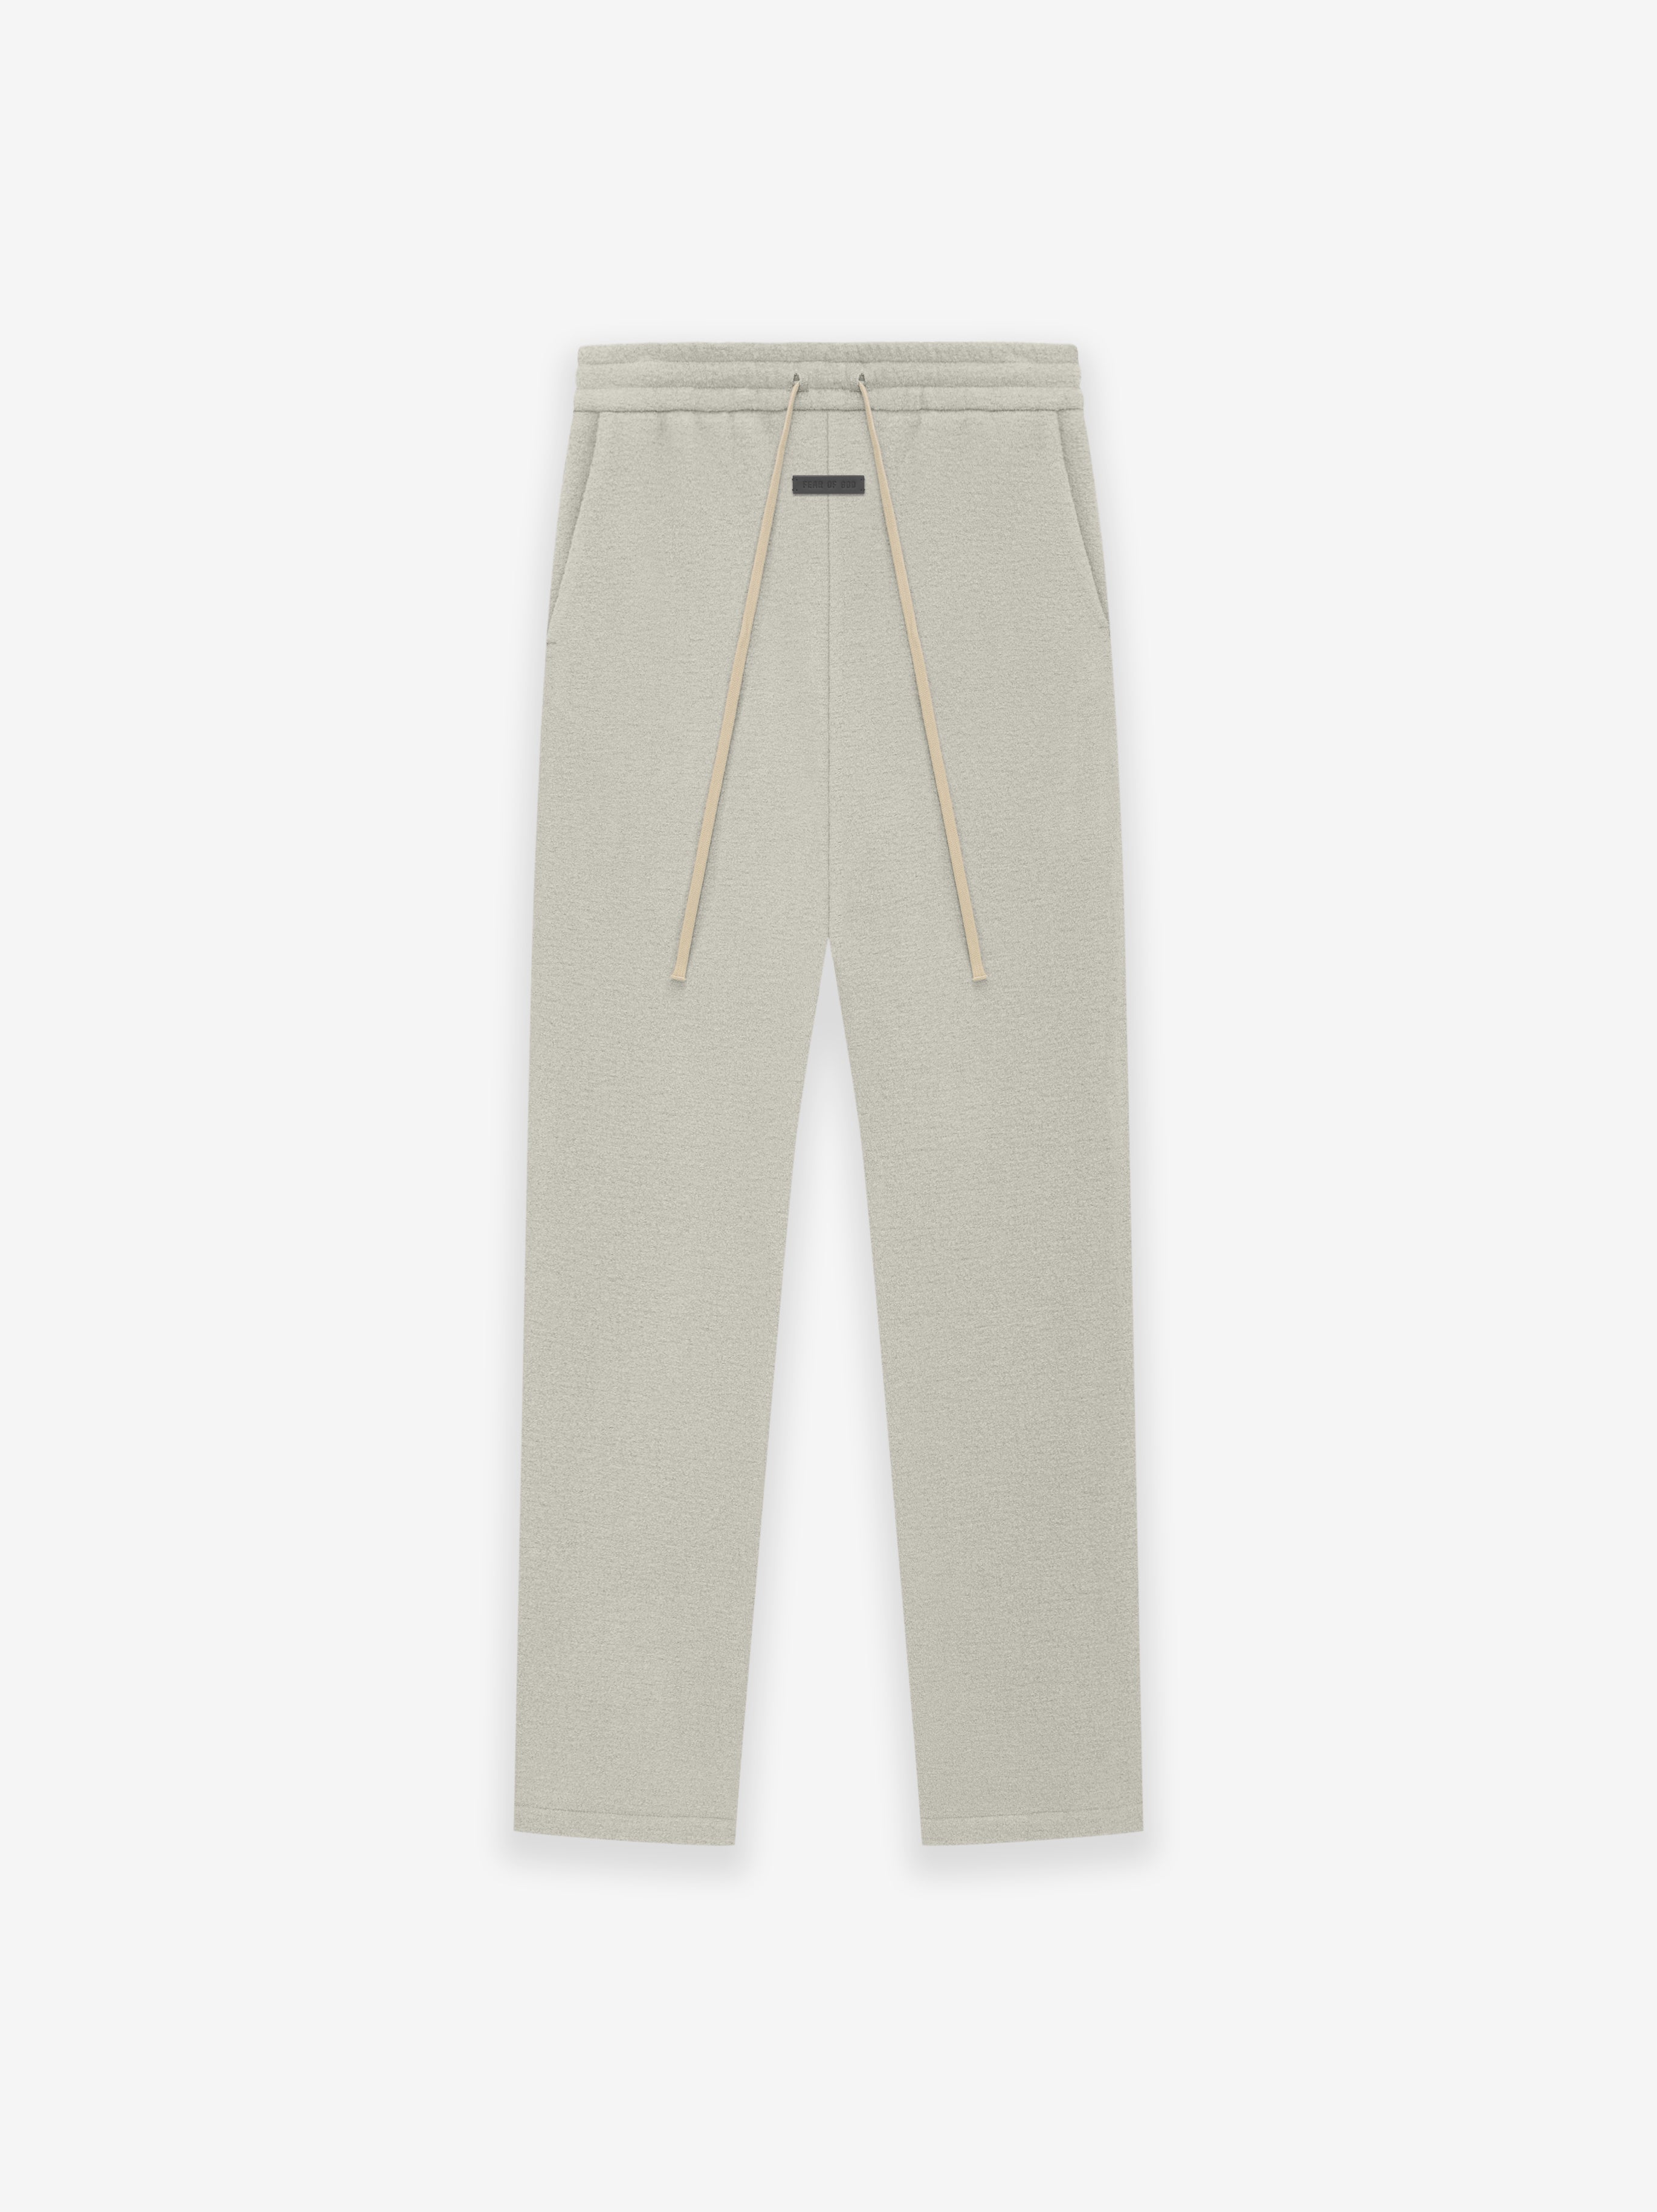 Forum Relaxed Wool Sweatpants